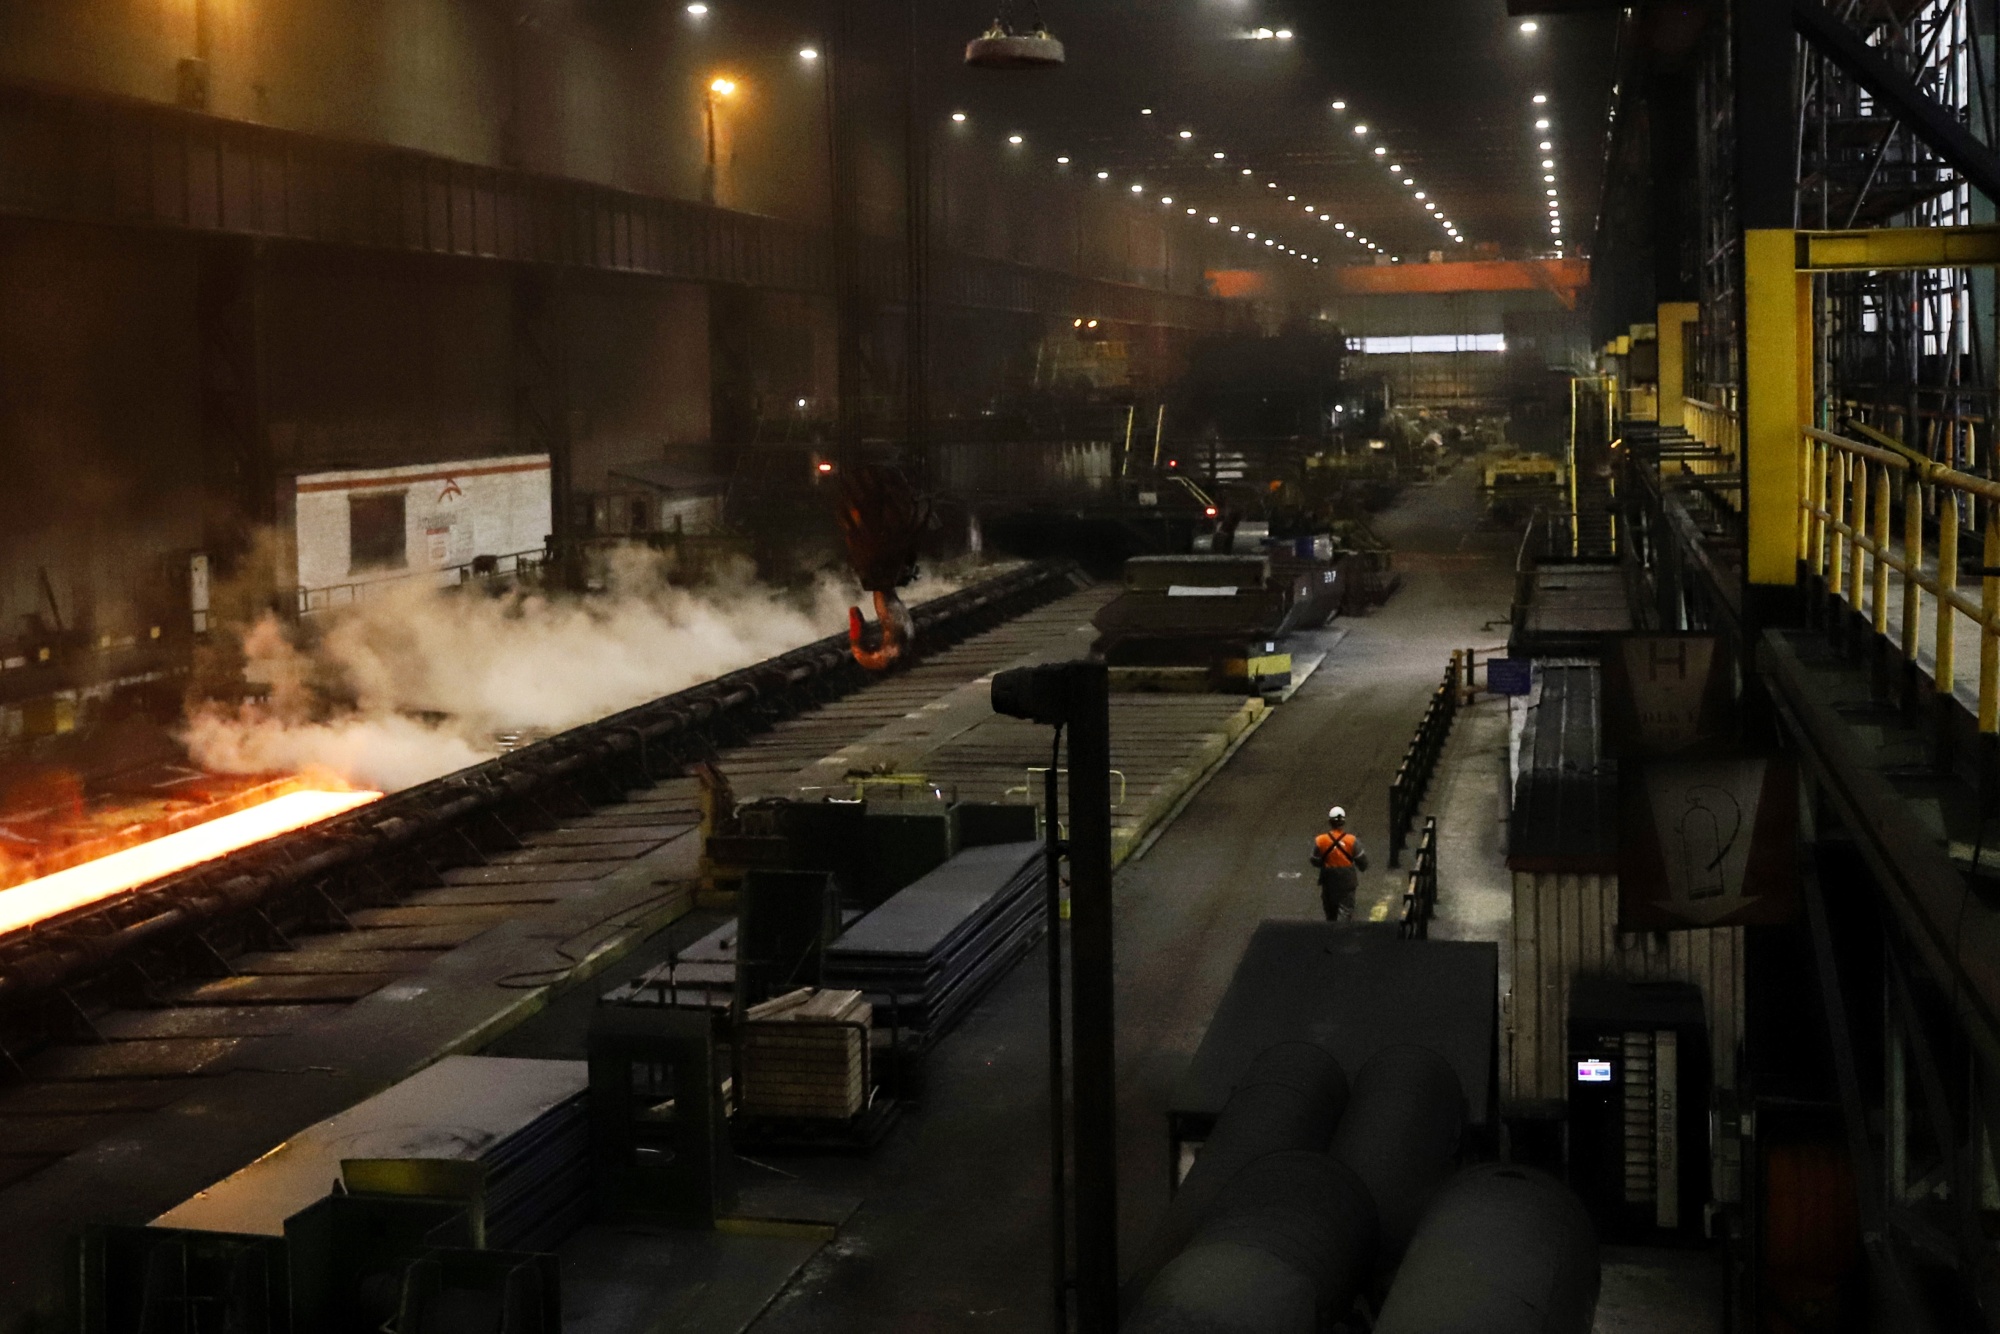 ArcelorMittal Exits Pandemic With Shift to Younger Generation